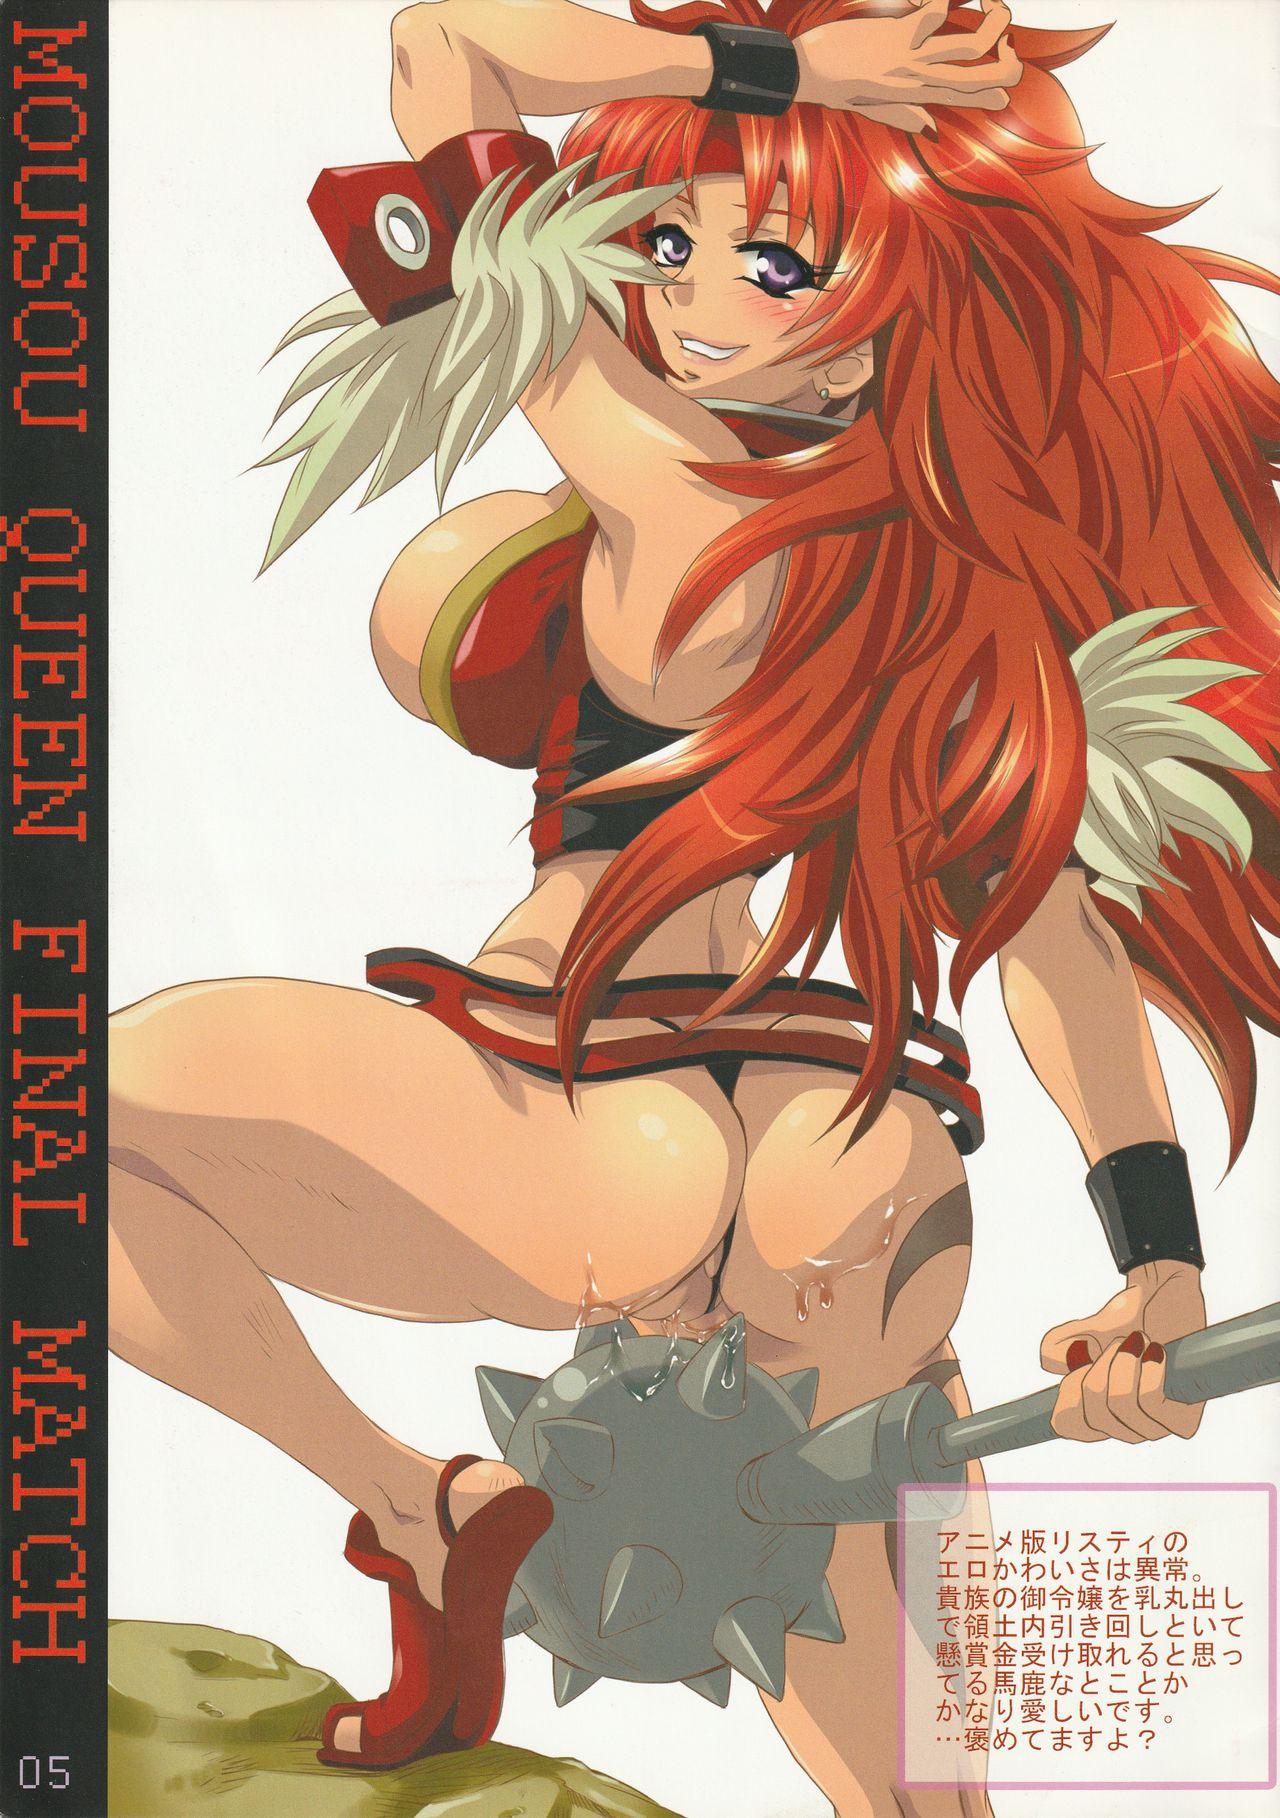 Flaquita Mousou Oujo Kettei Sen - Queens blade Family Roleplay - Page 5